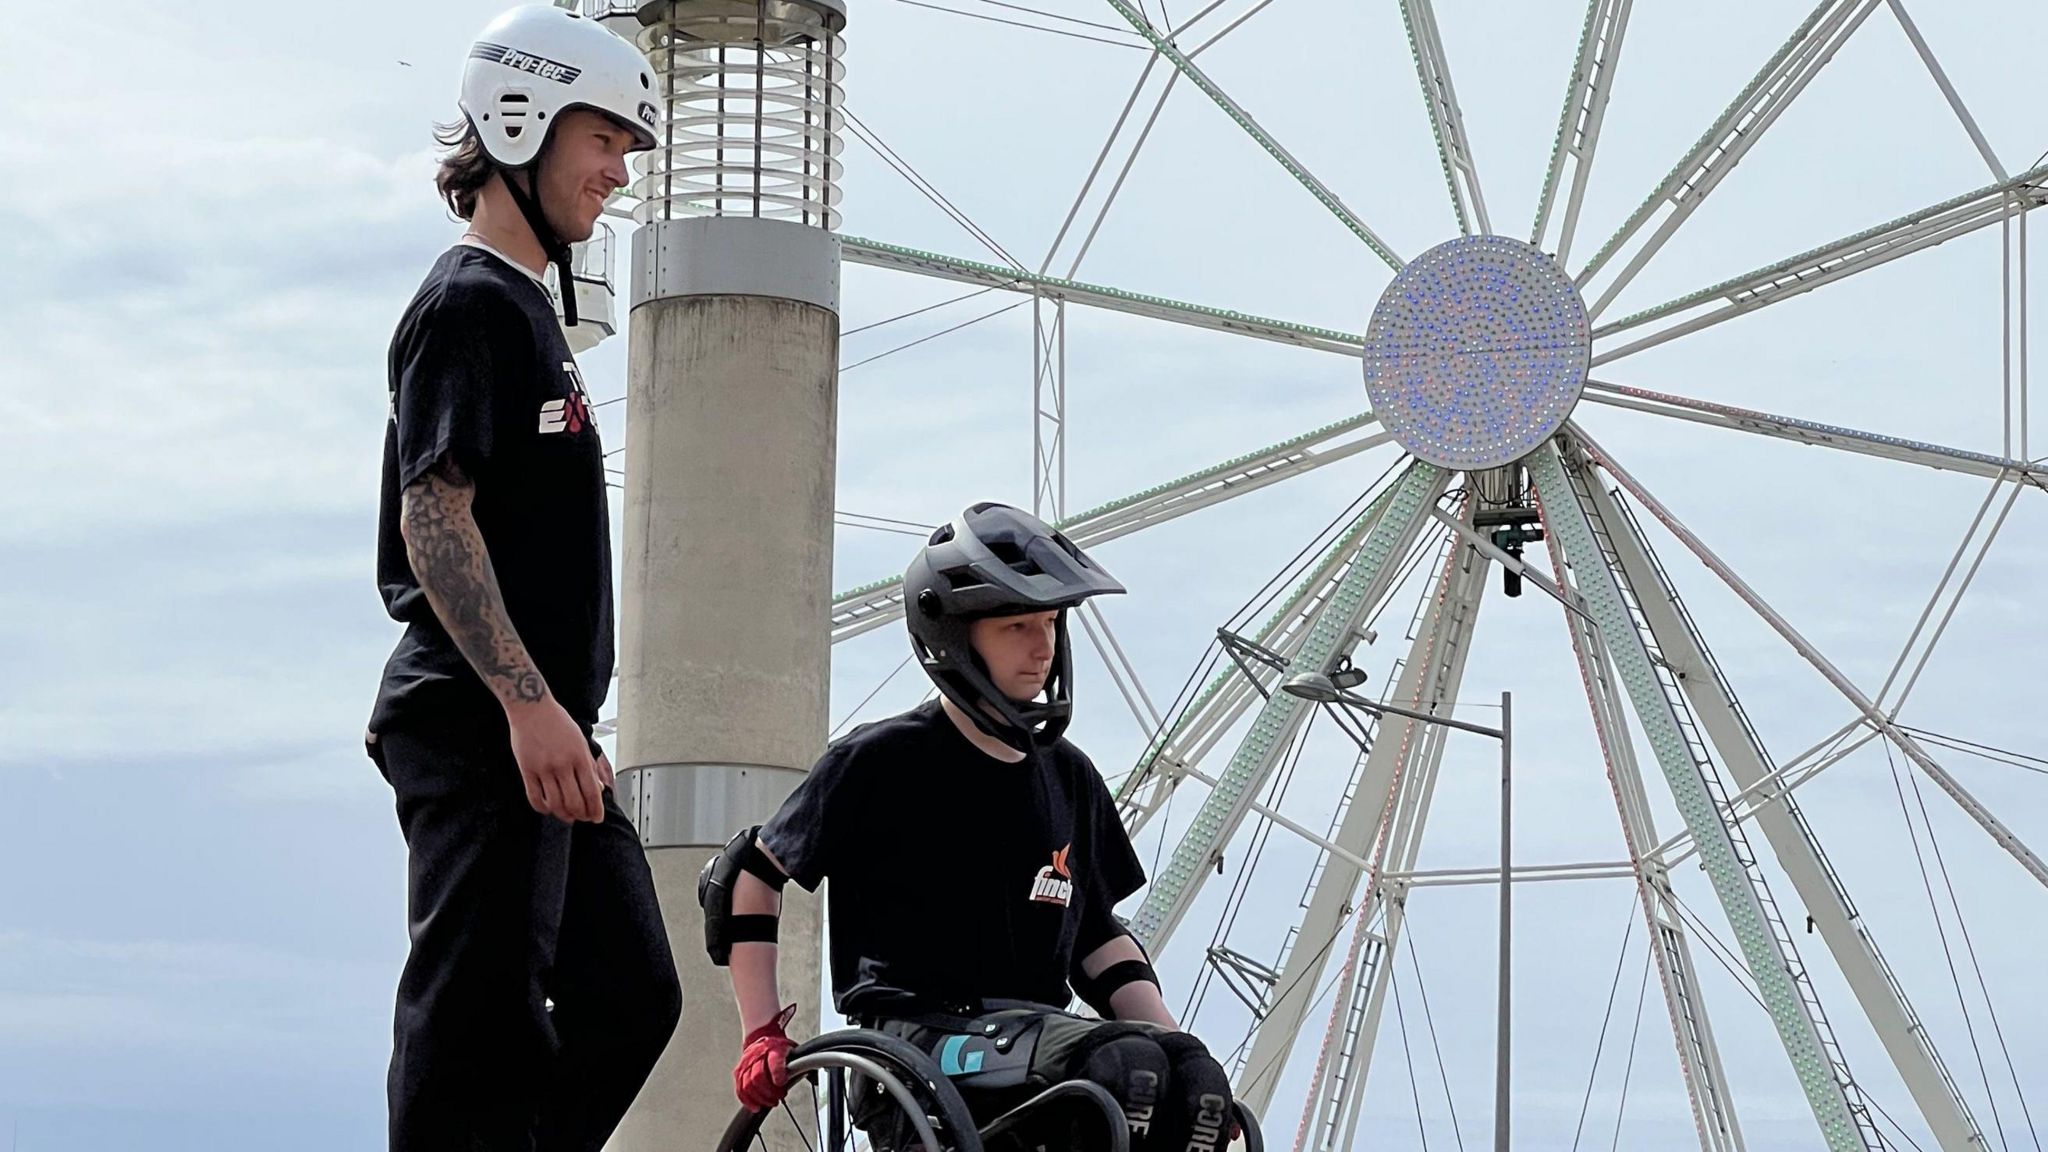 Tomas Woods, a 15-year-old wheelchair motocross (WCMX) world champion from Preston, who was on his way back from California, training with his coach, Ben Adshead in Calirfornia